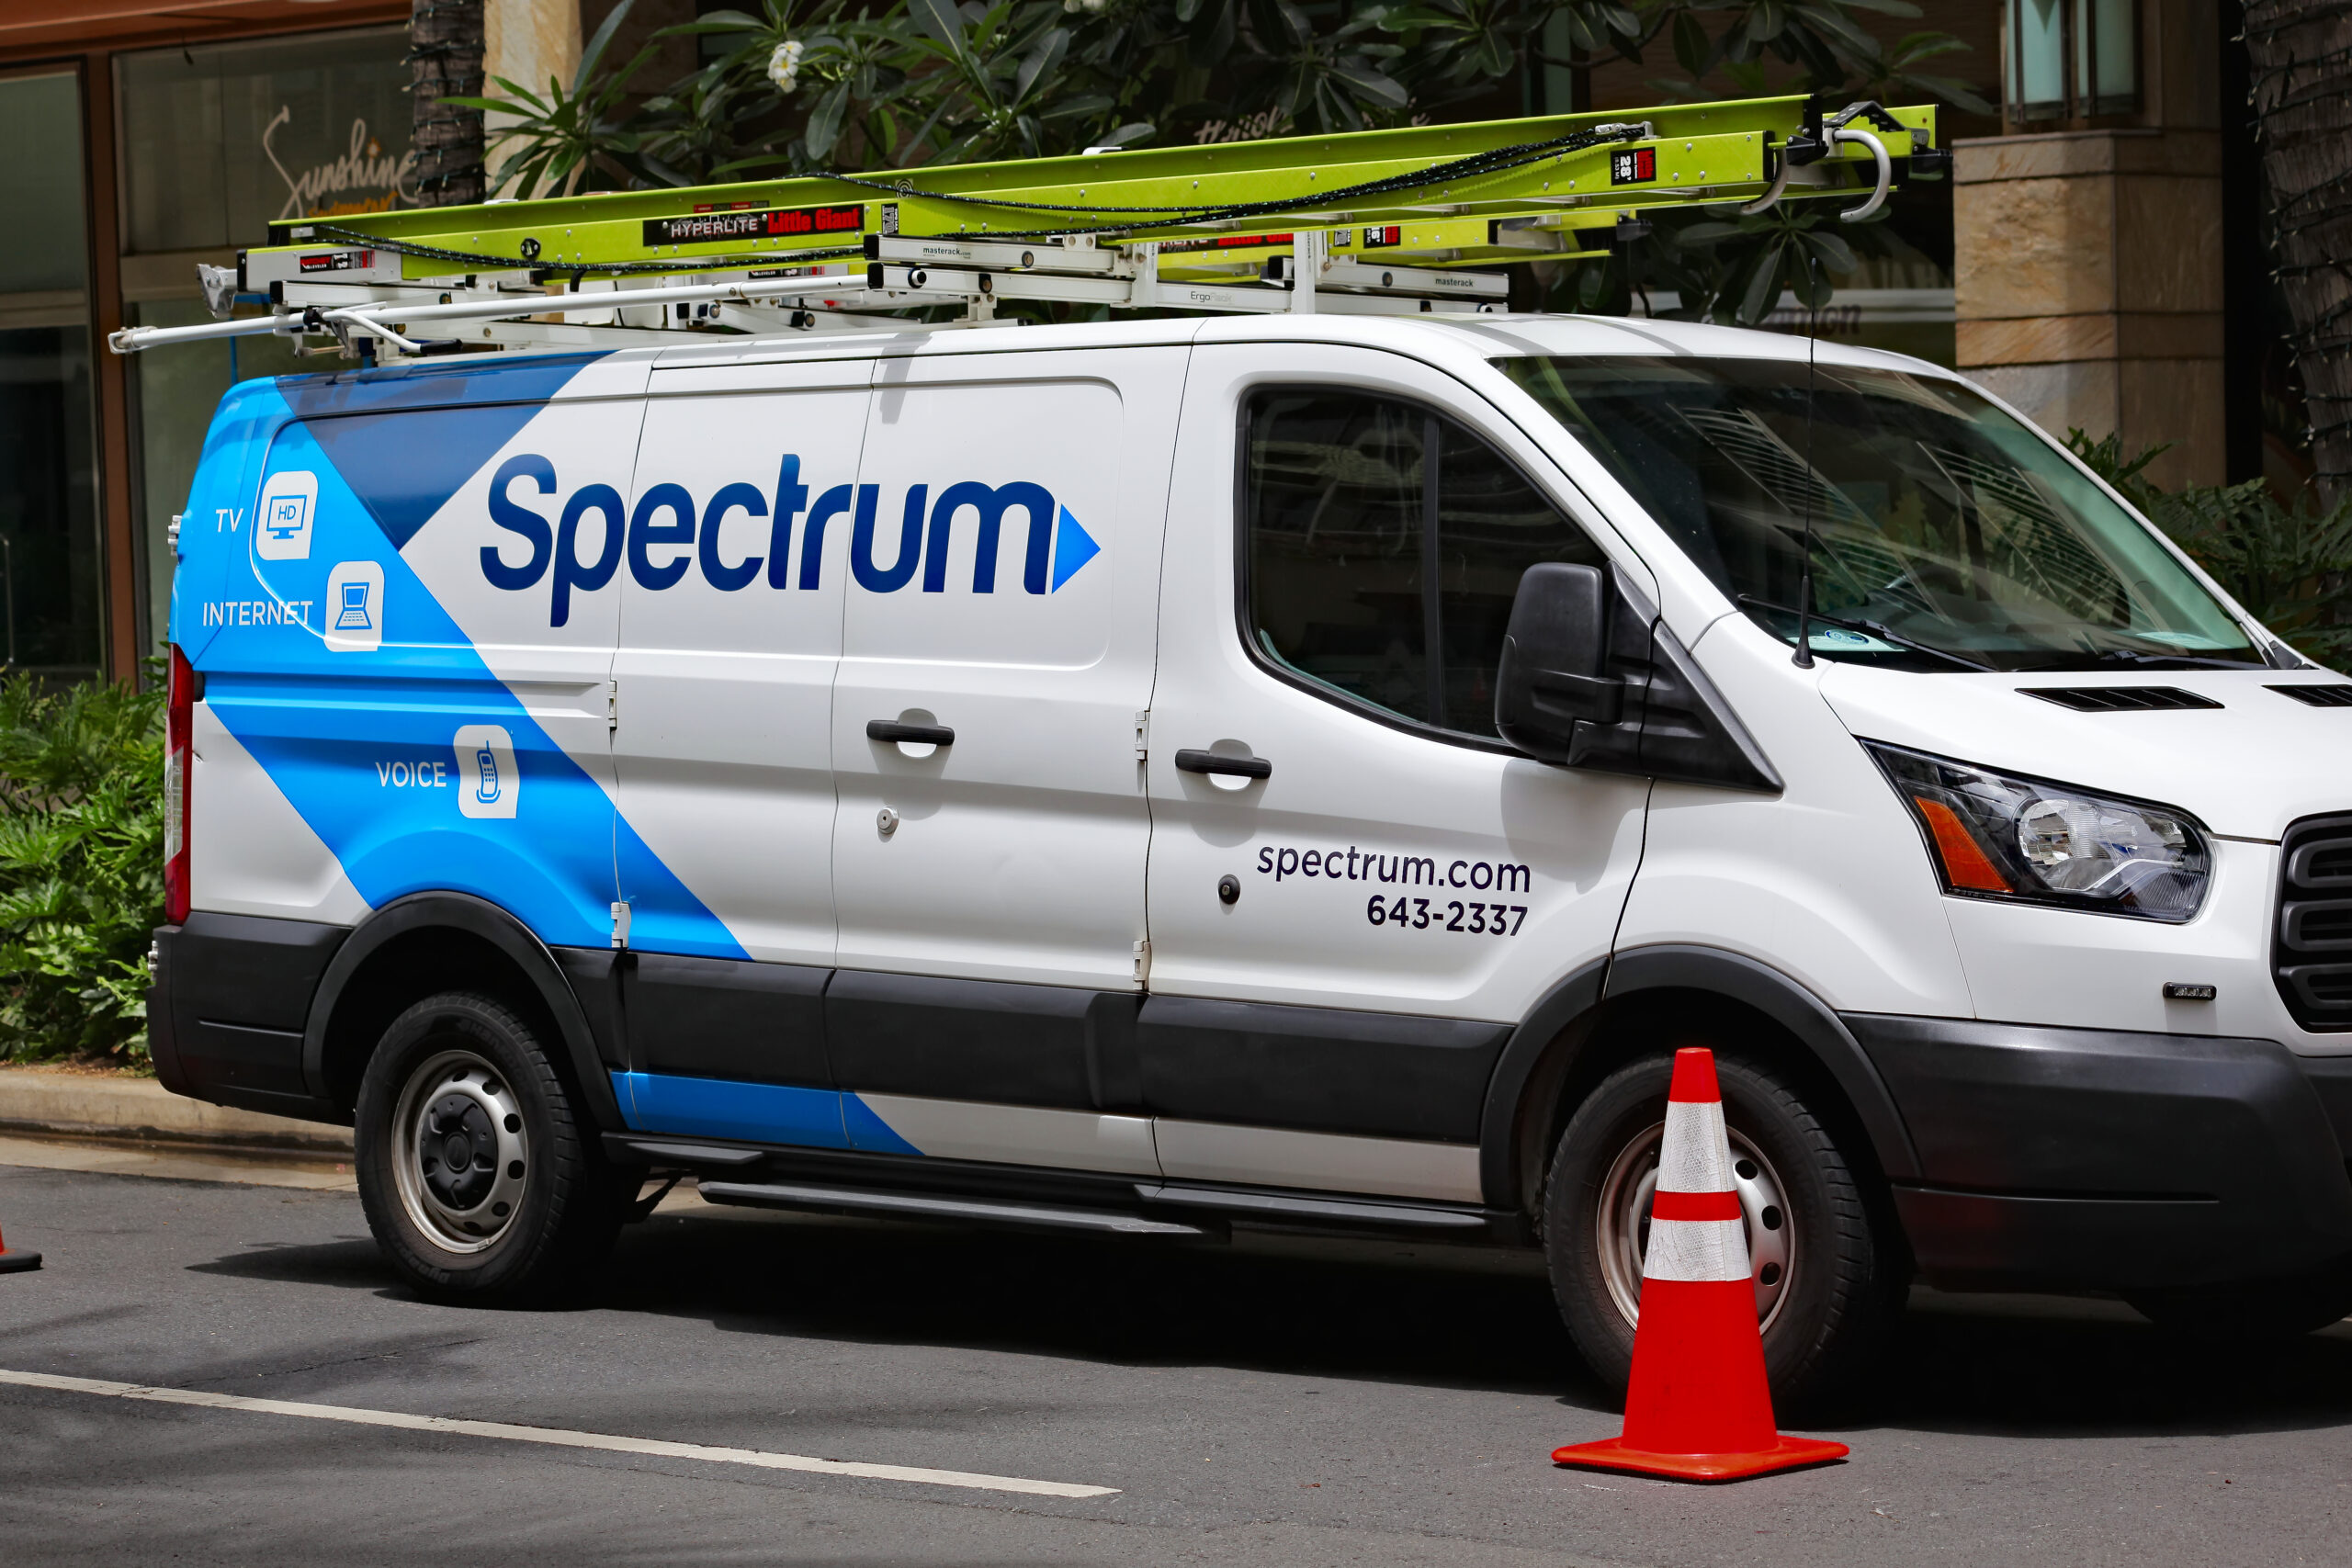 Spectrum May Buy Cable TV Competitor Altice USA, Also Known As Optimum